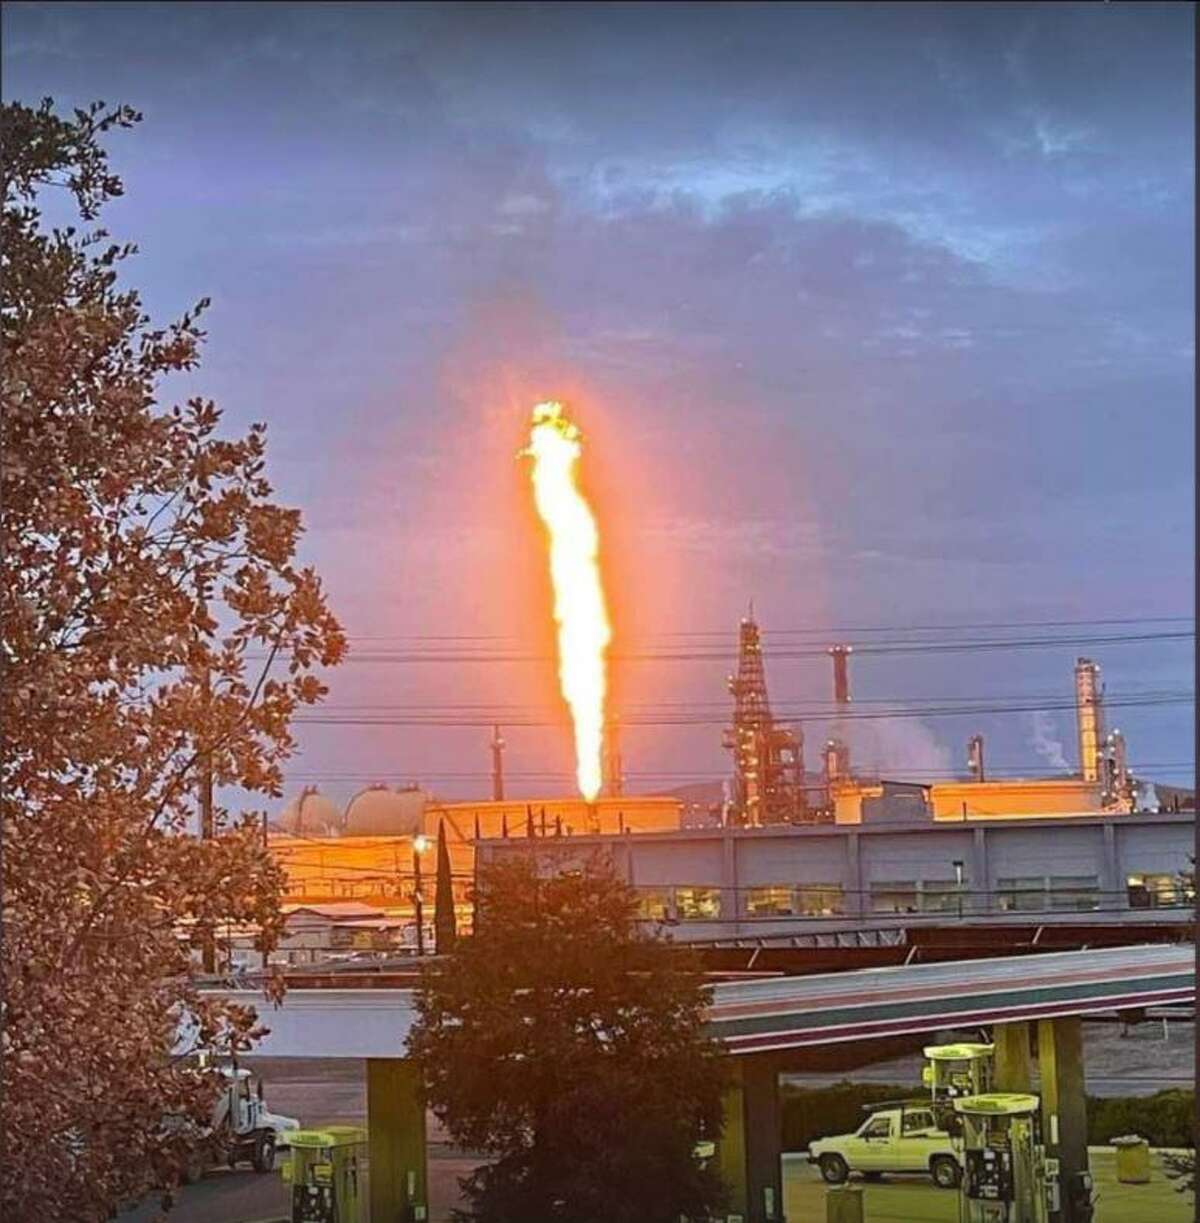 Flaring was seen at the Martinez Refinery Co. on Friday, Dec. 9, 2022.